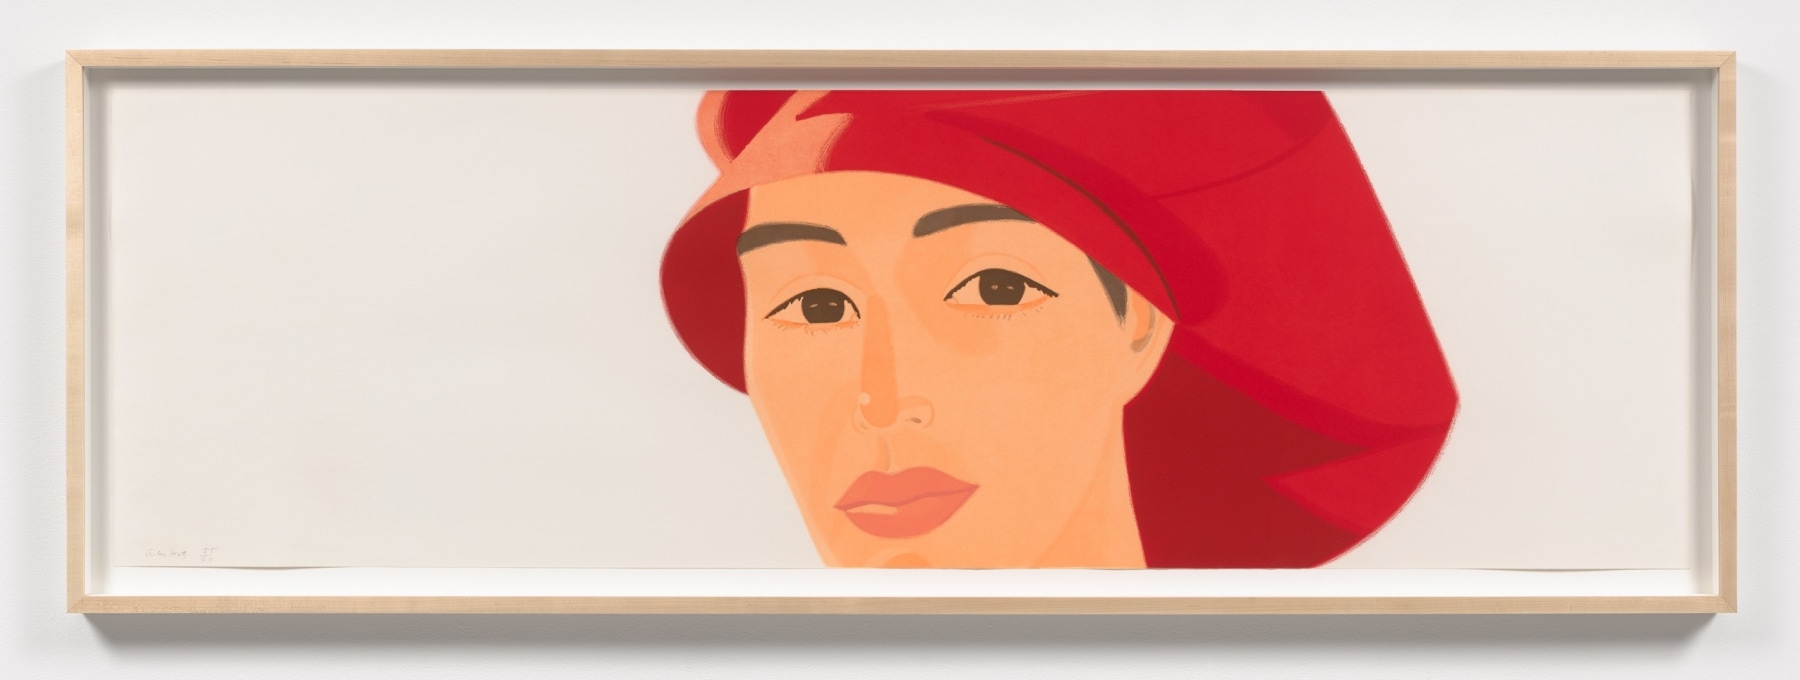 Alex Katz

Red Cap, 1989-1990
aquatint with litho crayon in four Colors, ed. of 60
20 7/8 x 69 1/8 in. / 53 x 175.6 cm